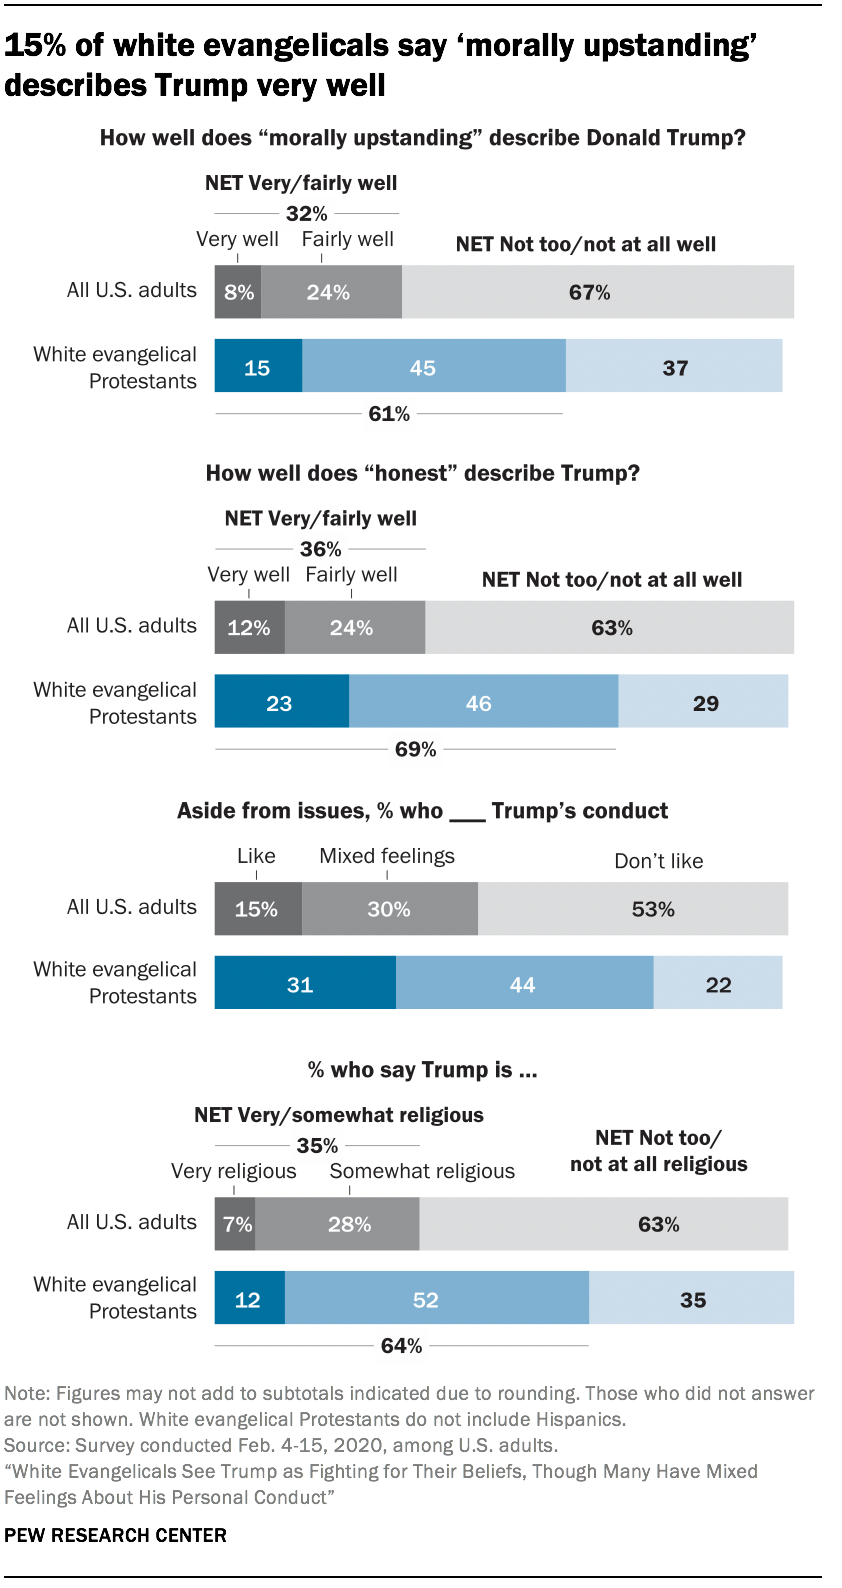 15% of white evangelicals say ‘morally upstanding’ describes Trump very well